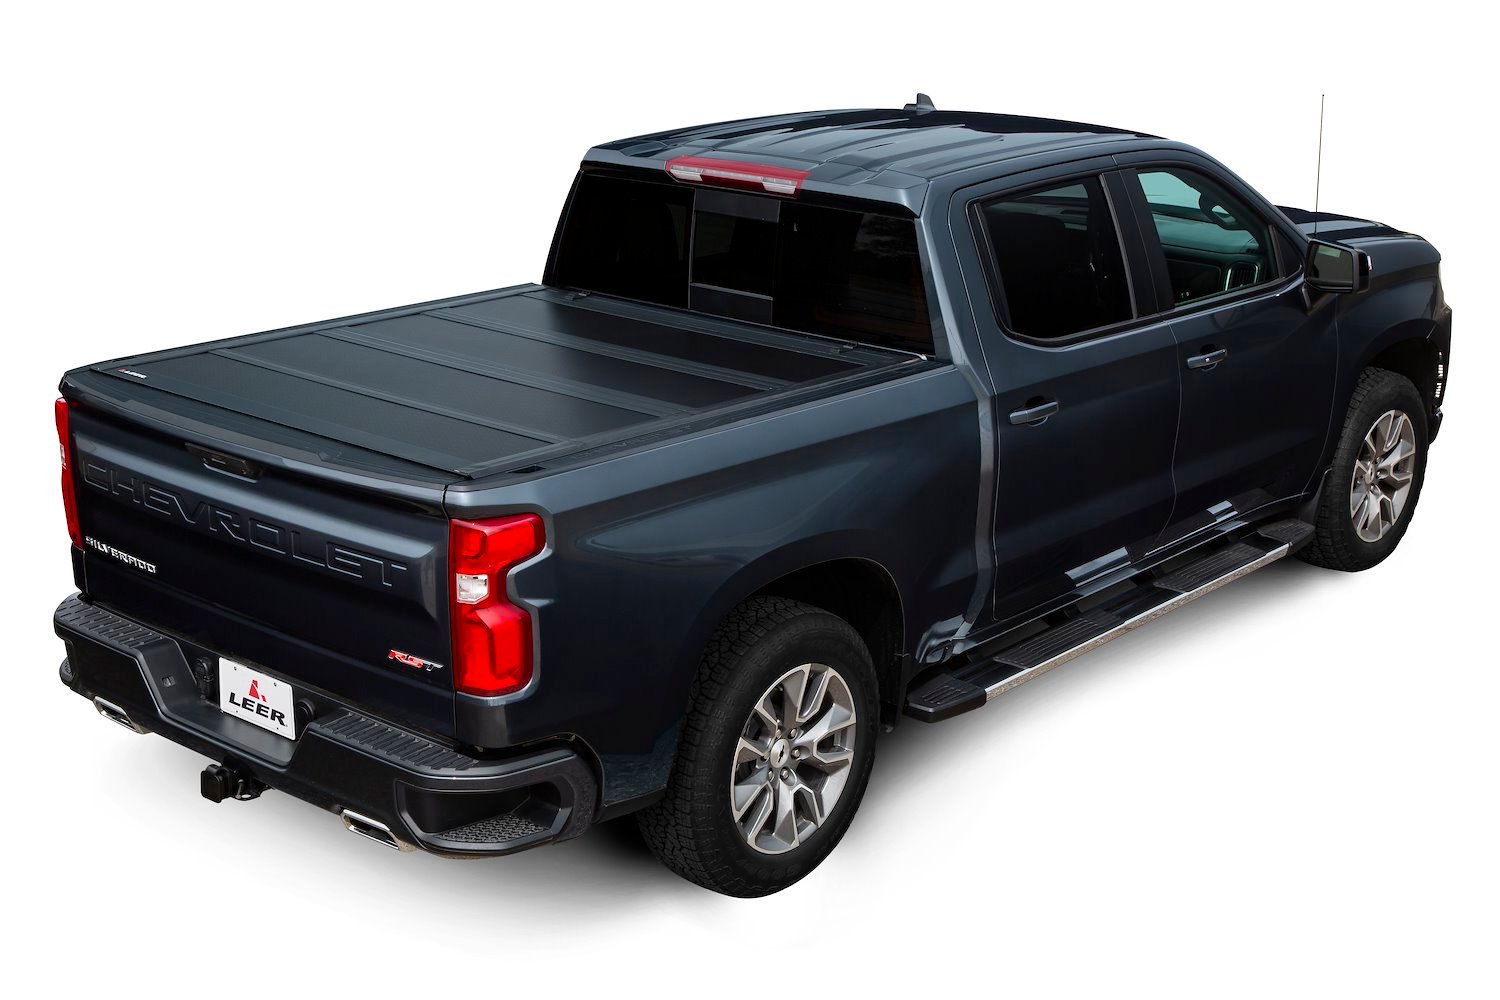 HF650M Hard Quad-Folding Tonneau Cover Fits Select Ram 1500, 2500, 3500 [Bed Length: 6 ft. 4 in.]